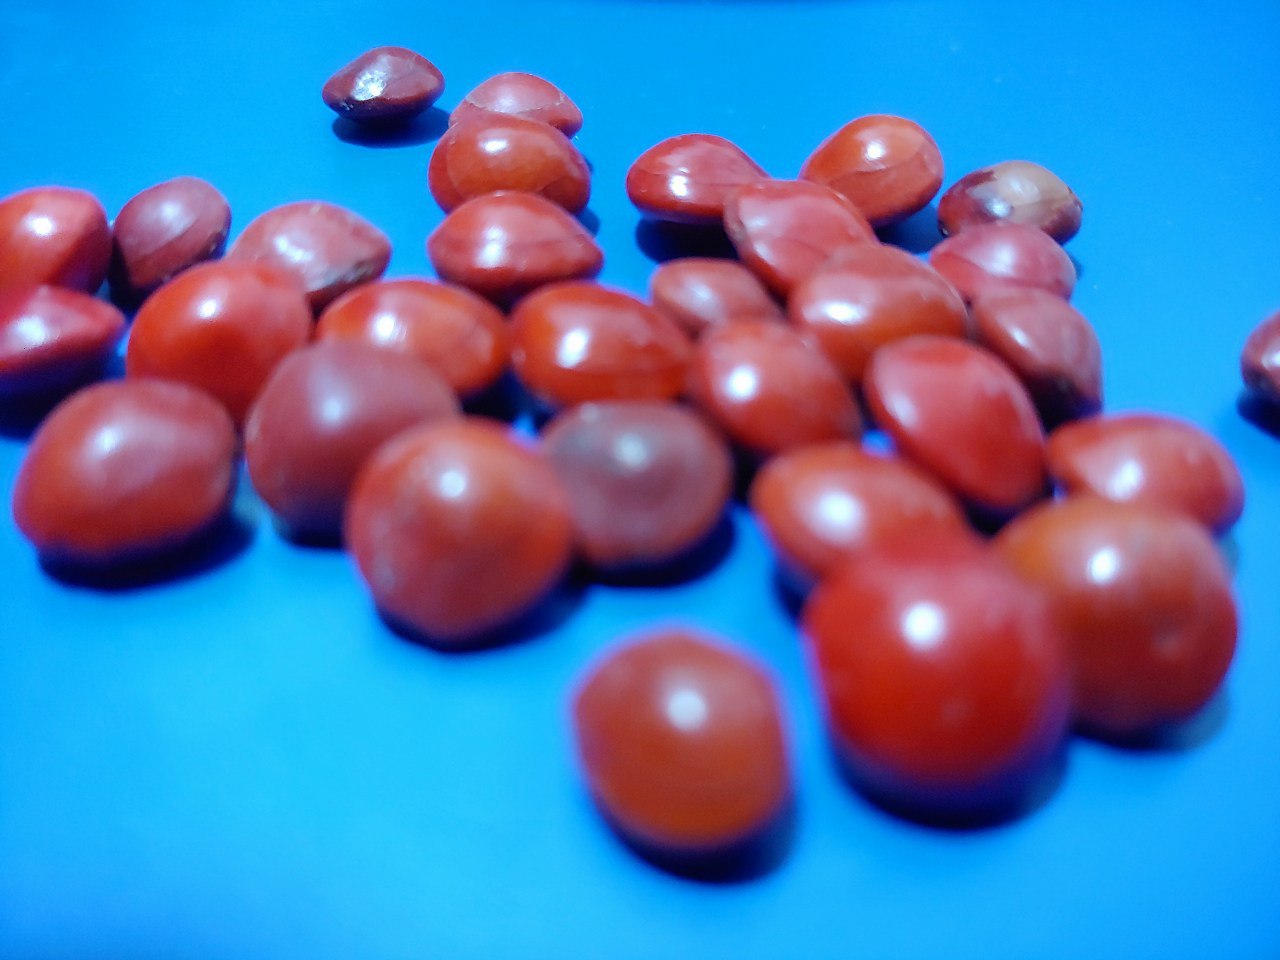 Shiny red seeds